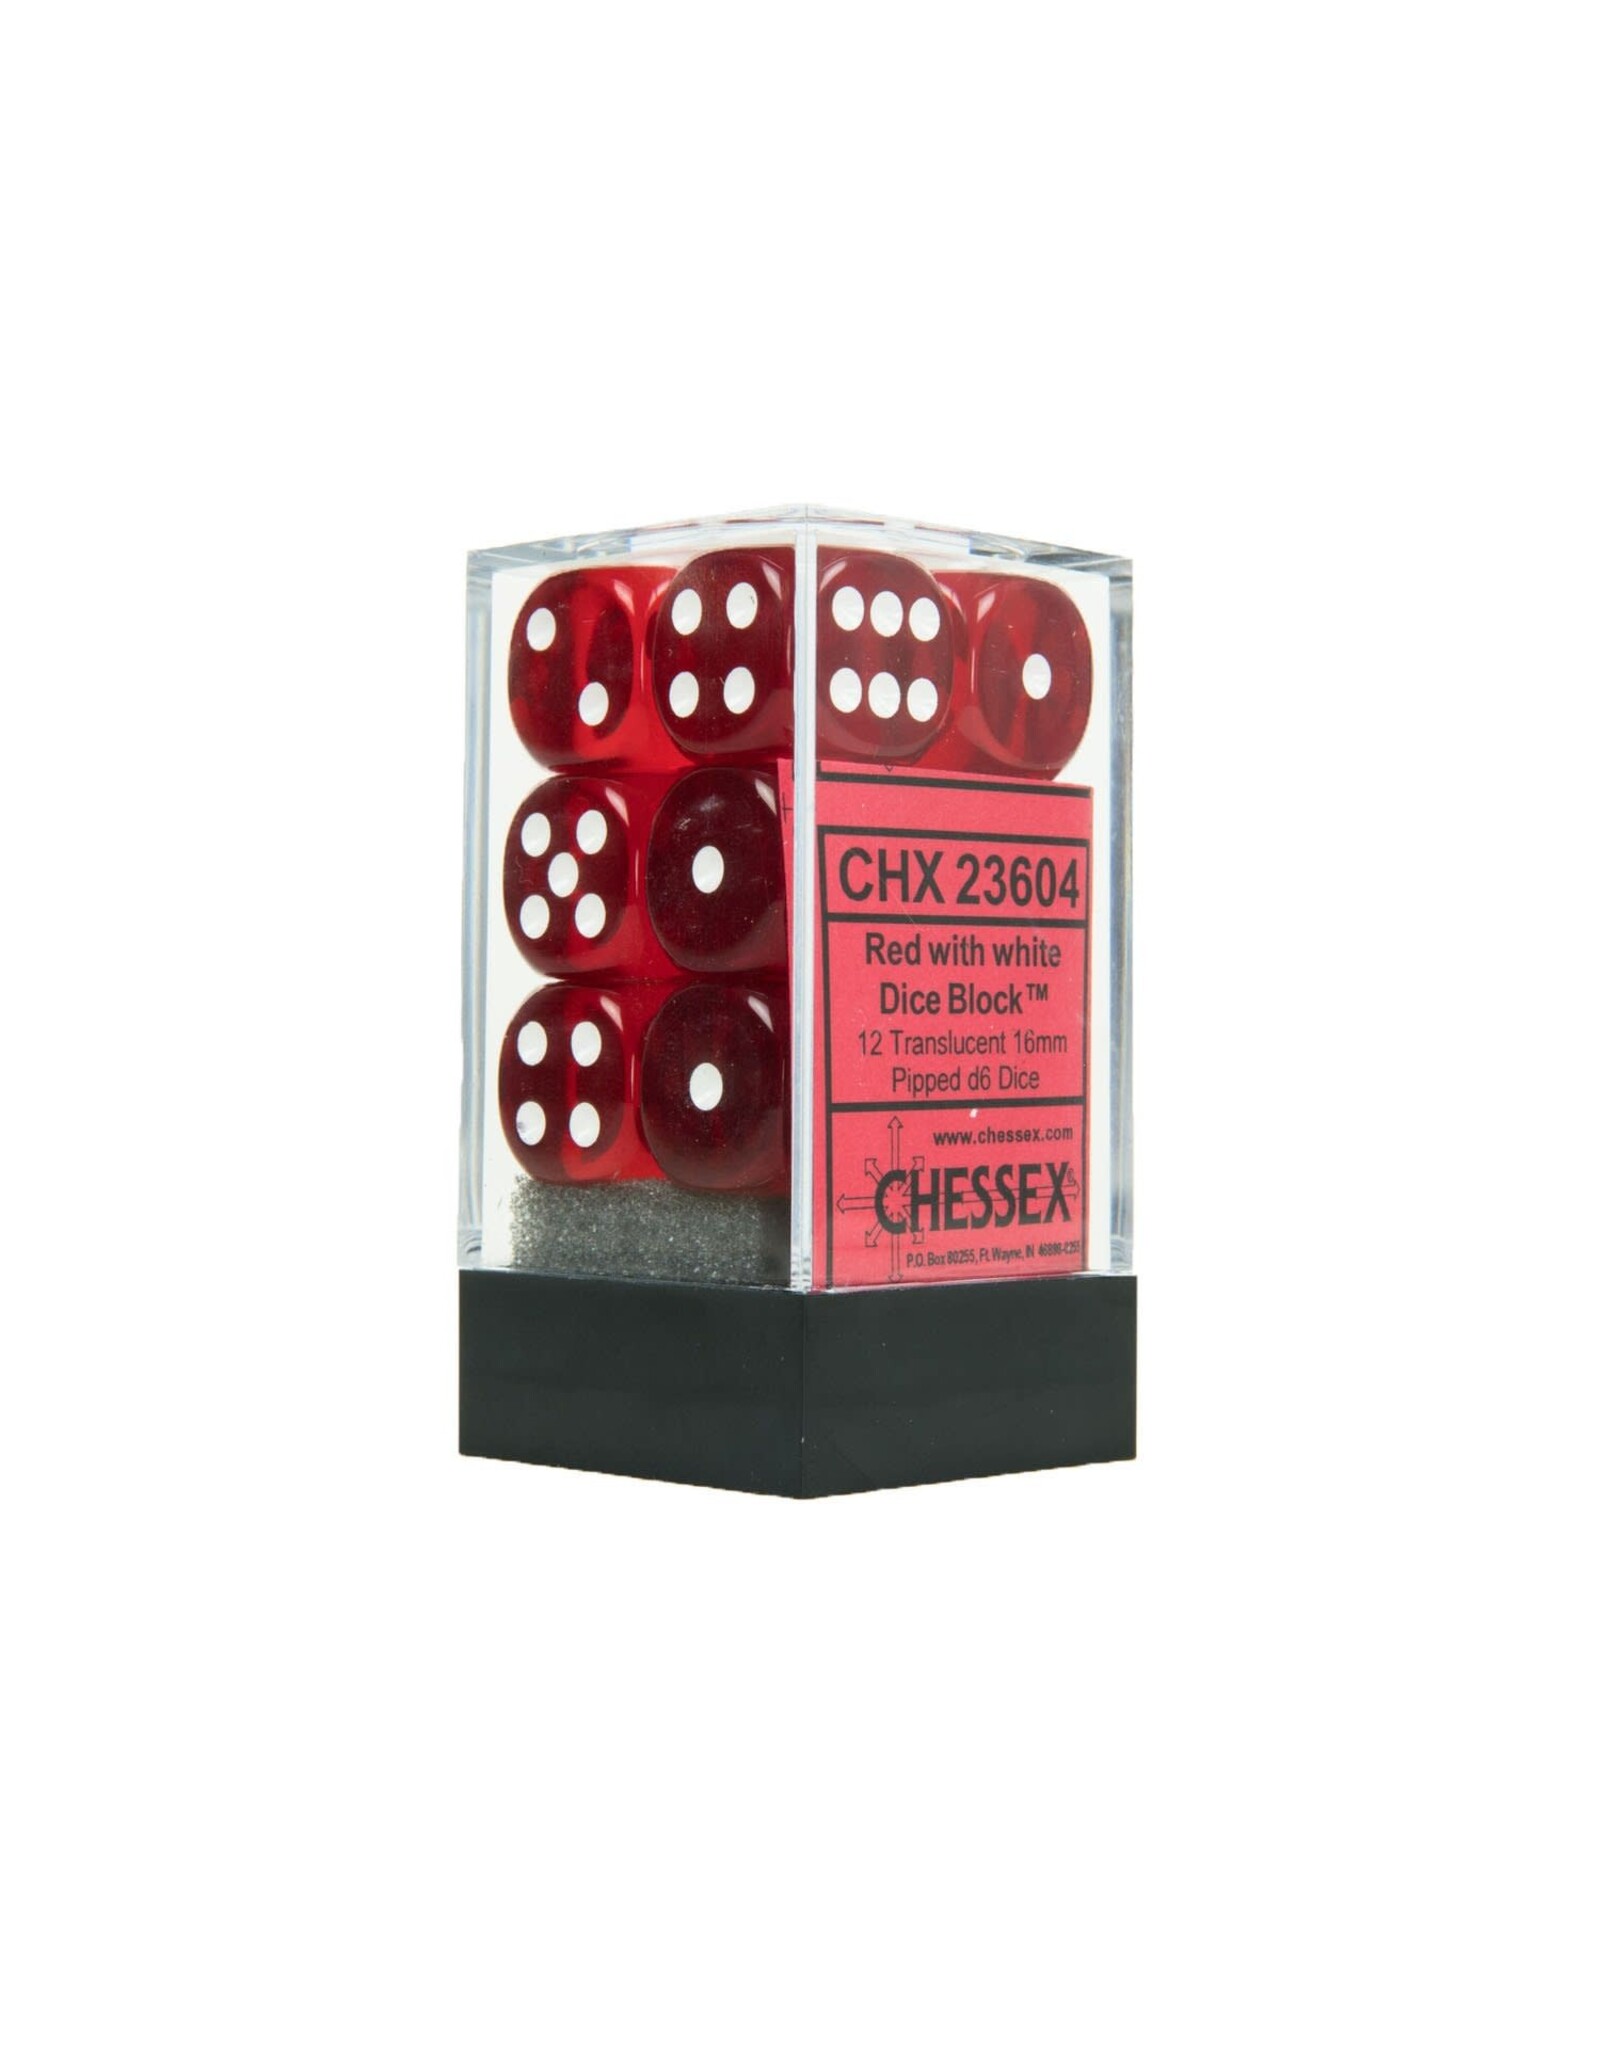 Chessex Red/white Translucent 16mm D6 dice set